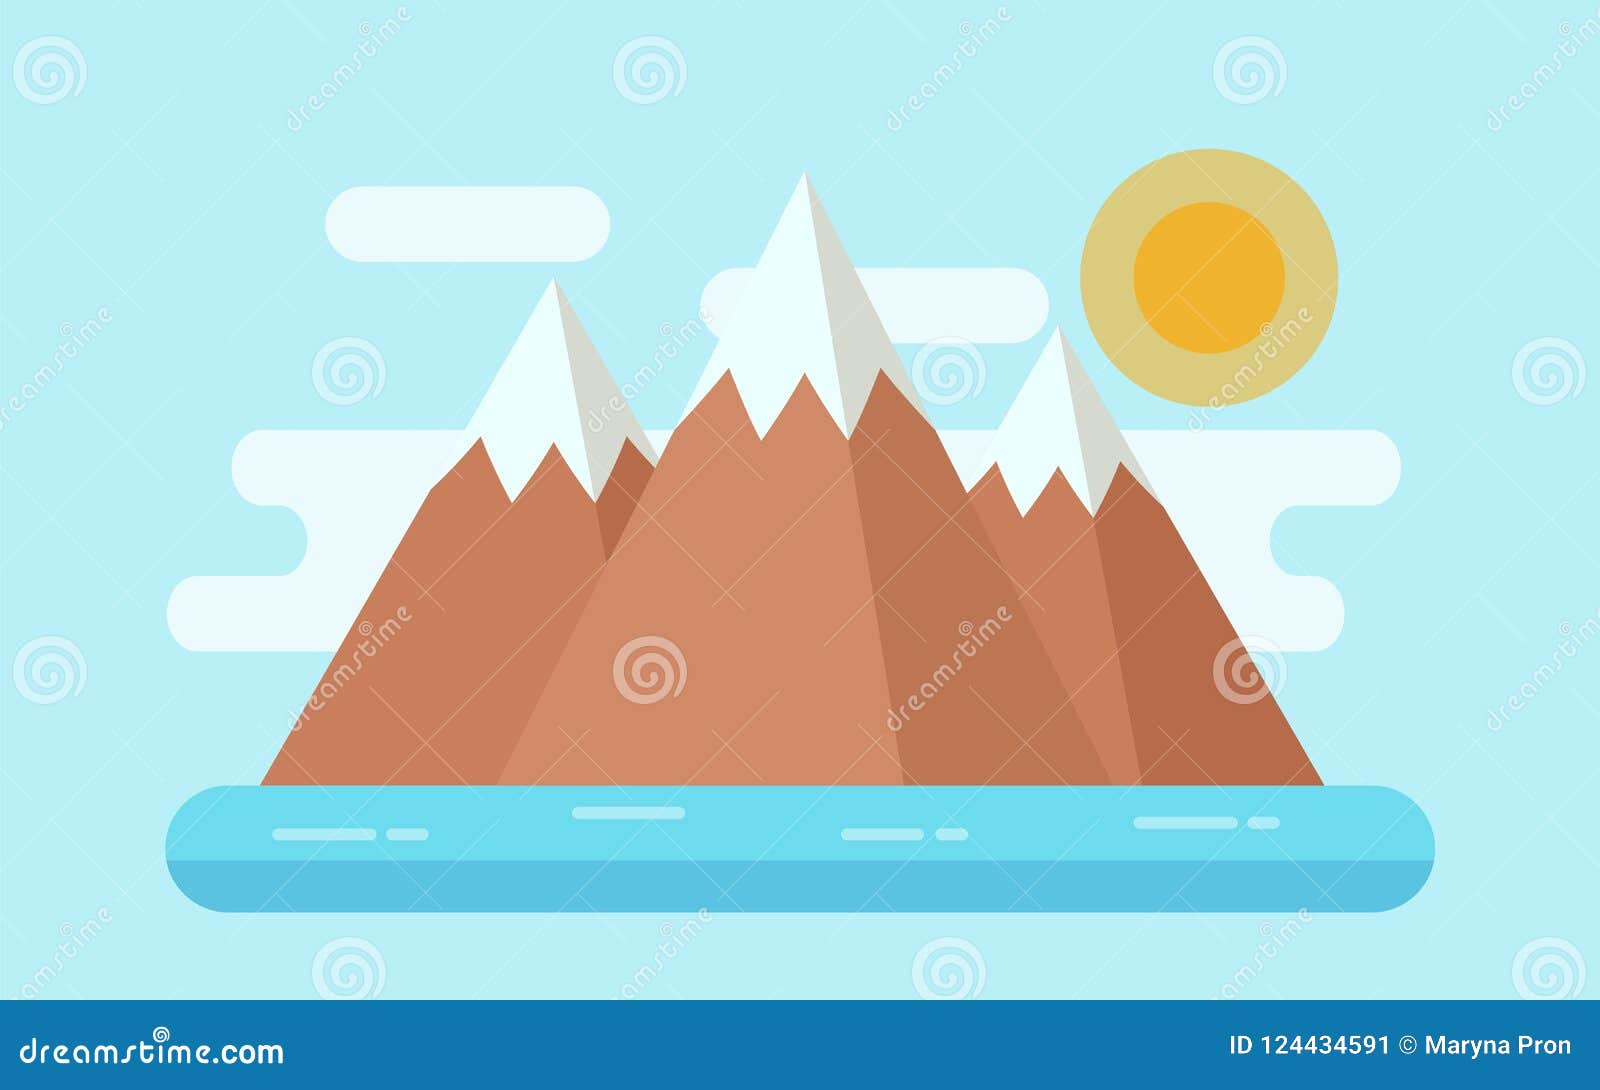 Sea Landscape With Snow Mountains, Island. Vector Flat Illustration